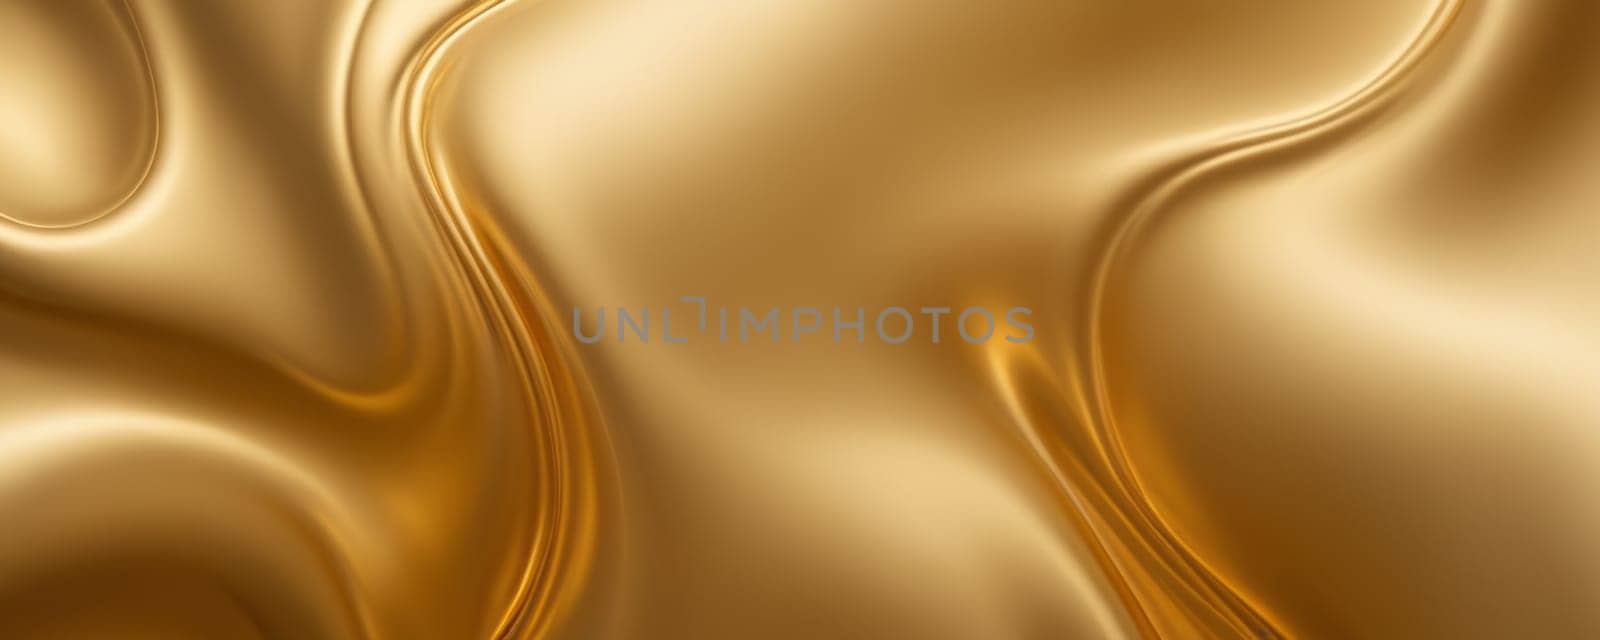 Smooth and Flowing Golden Texture on a Light Background by nkotlyar